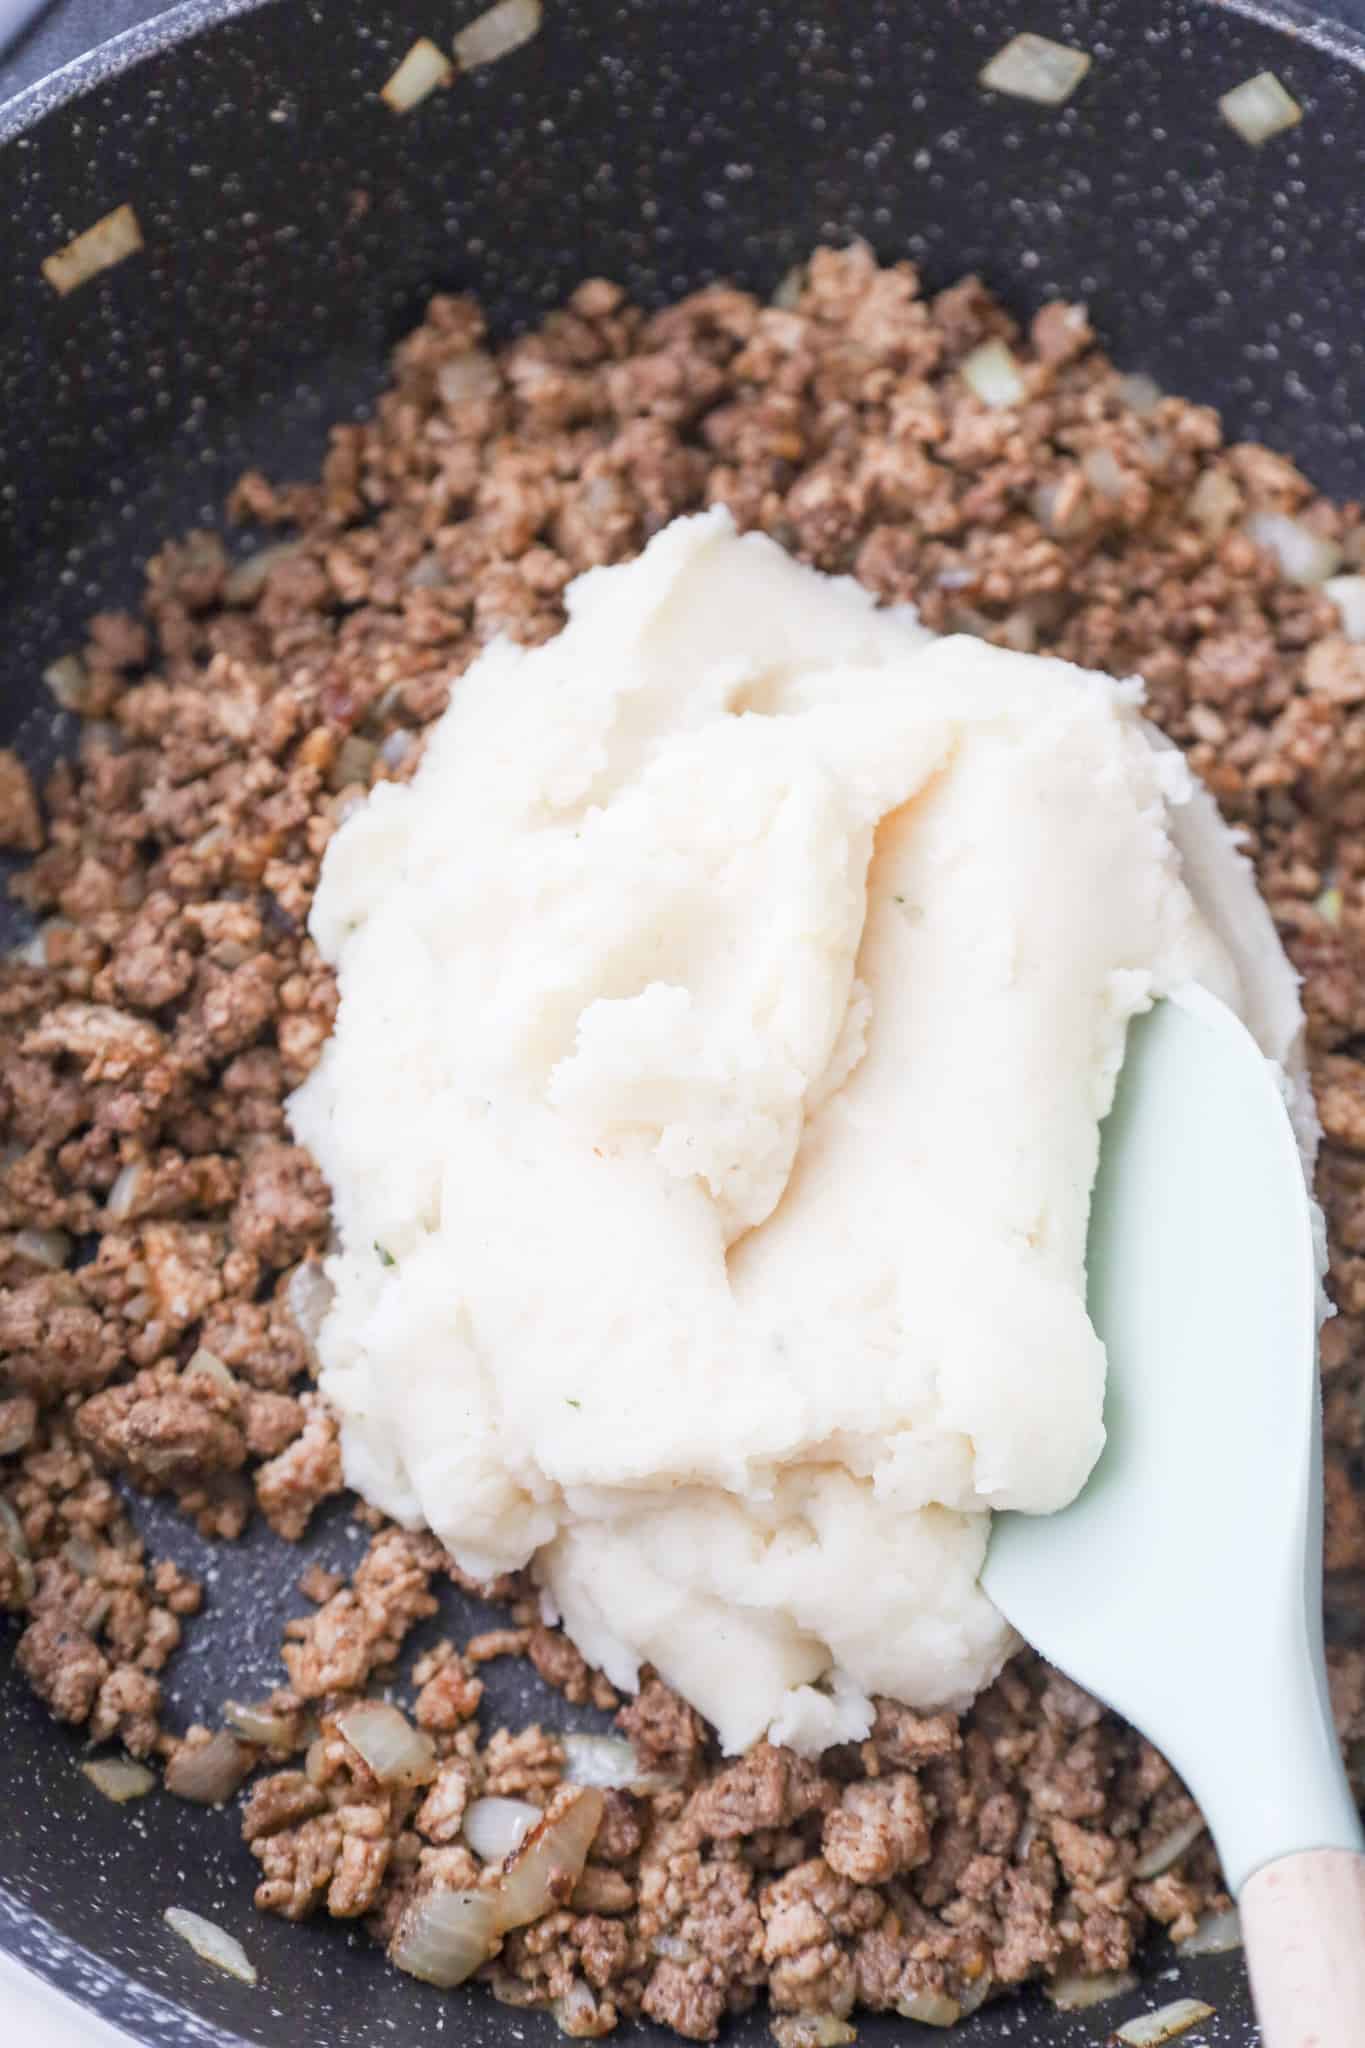 mashed potatoes on top of cooked ground beef and ground pork mixture in a saute pan